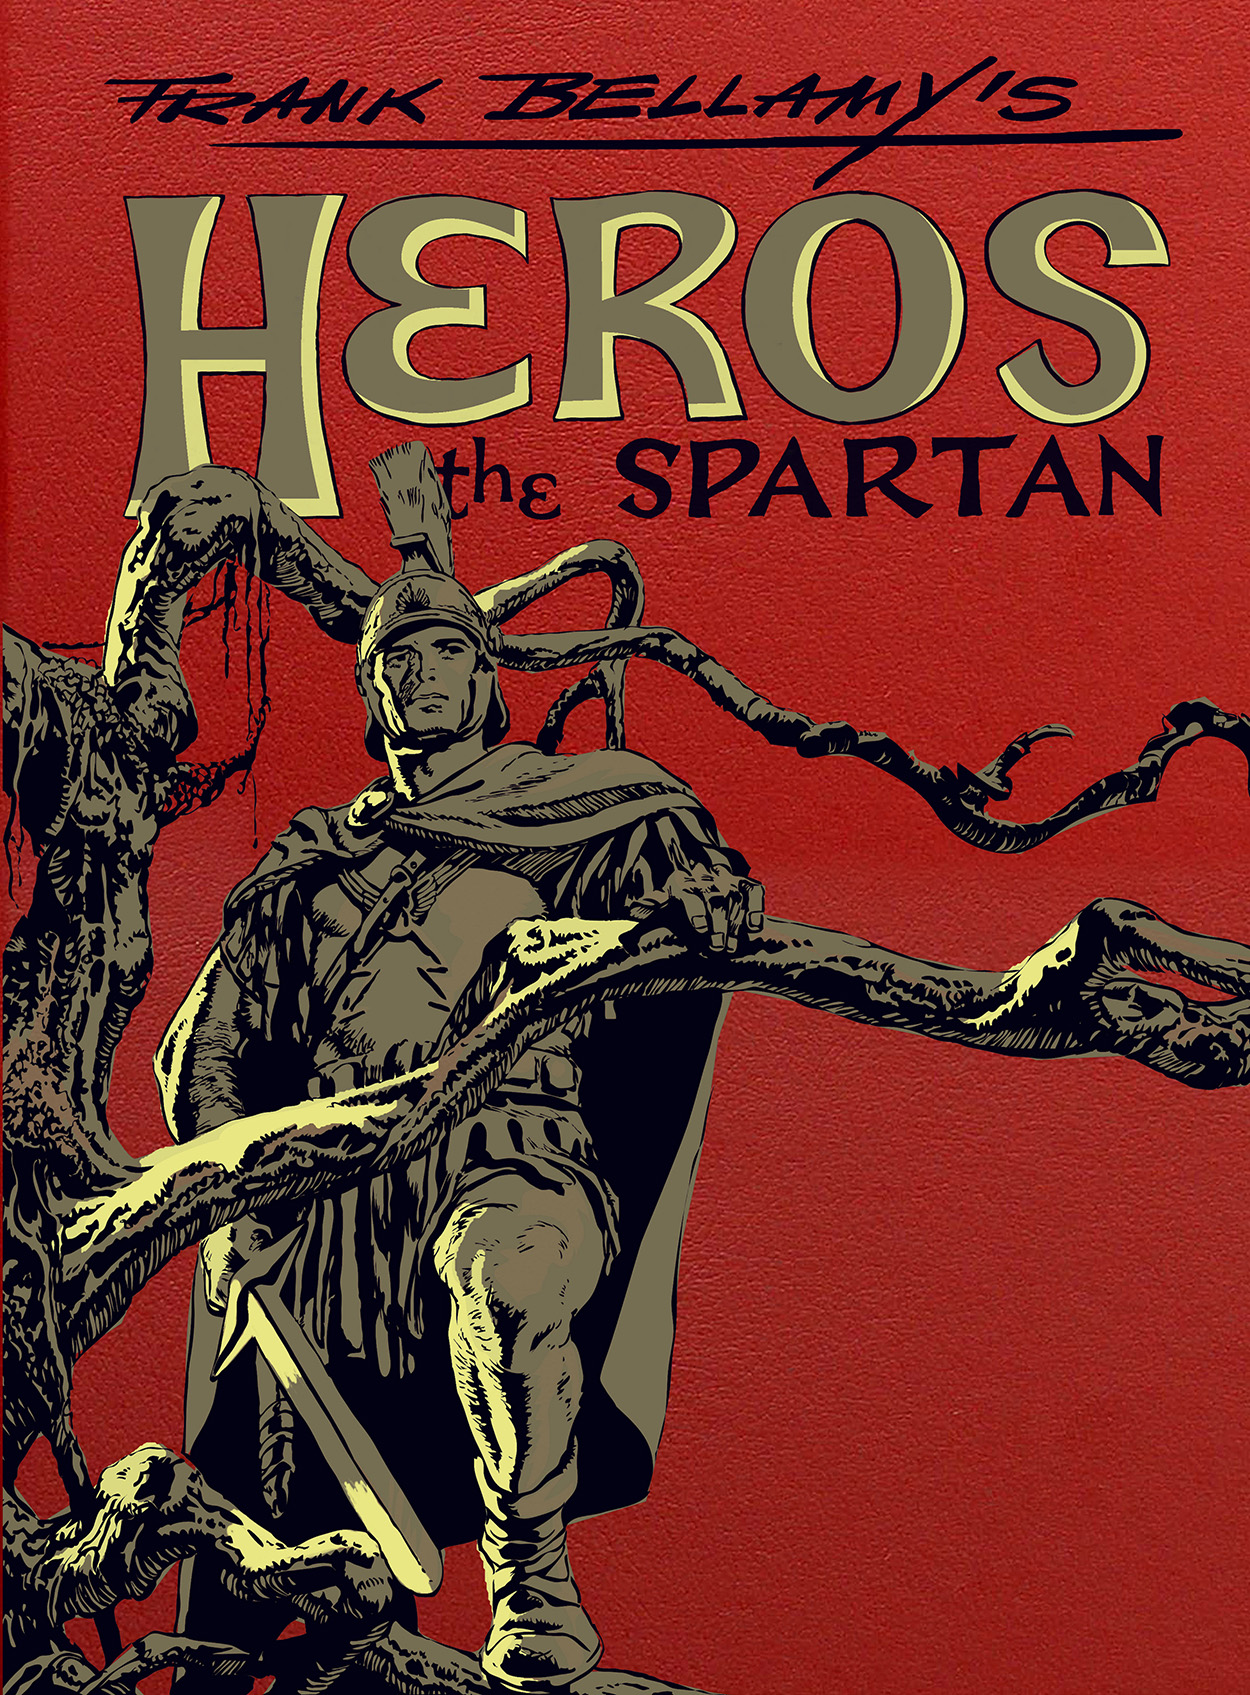 Frank Bellamy's Heros the Spartan The Complete Adventures (Leatherbound) (Limited Edition) at The Book Palace